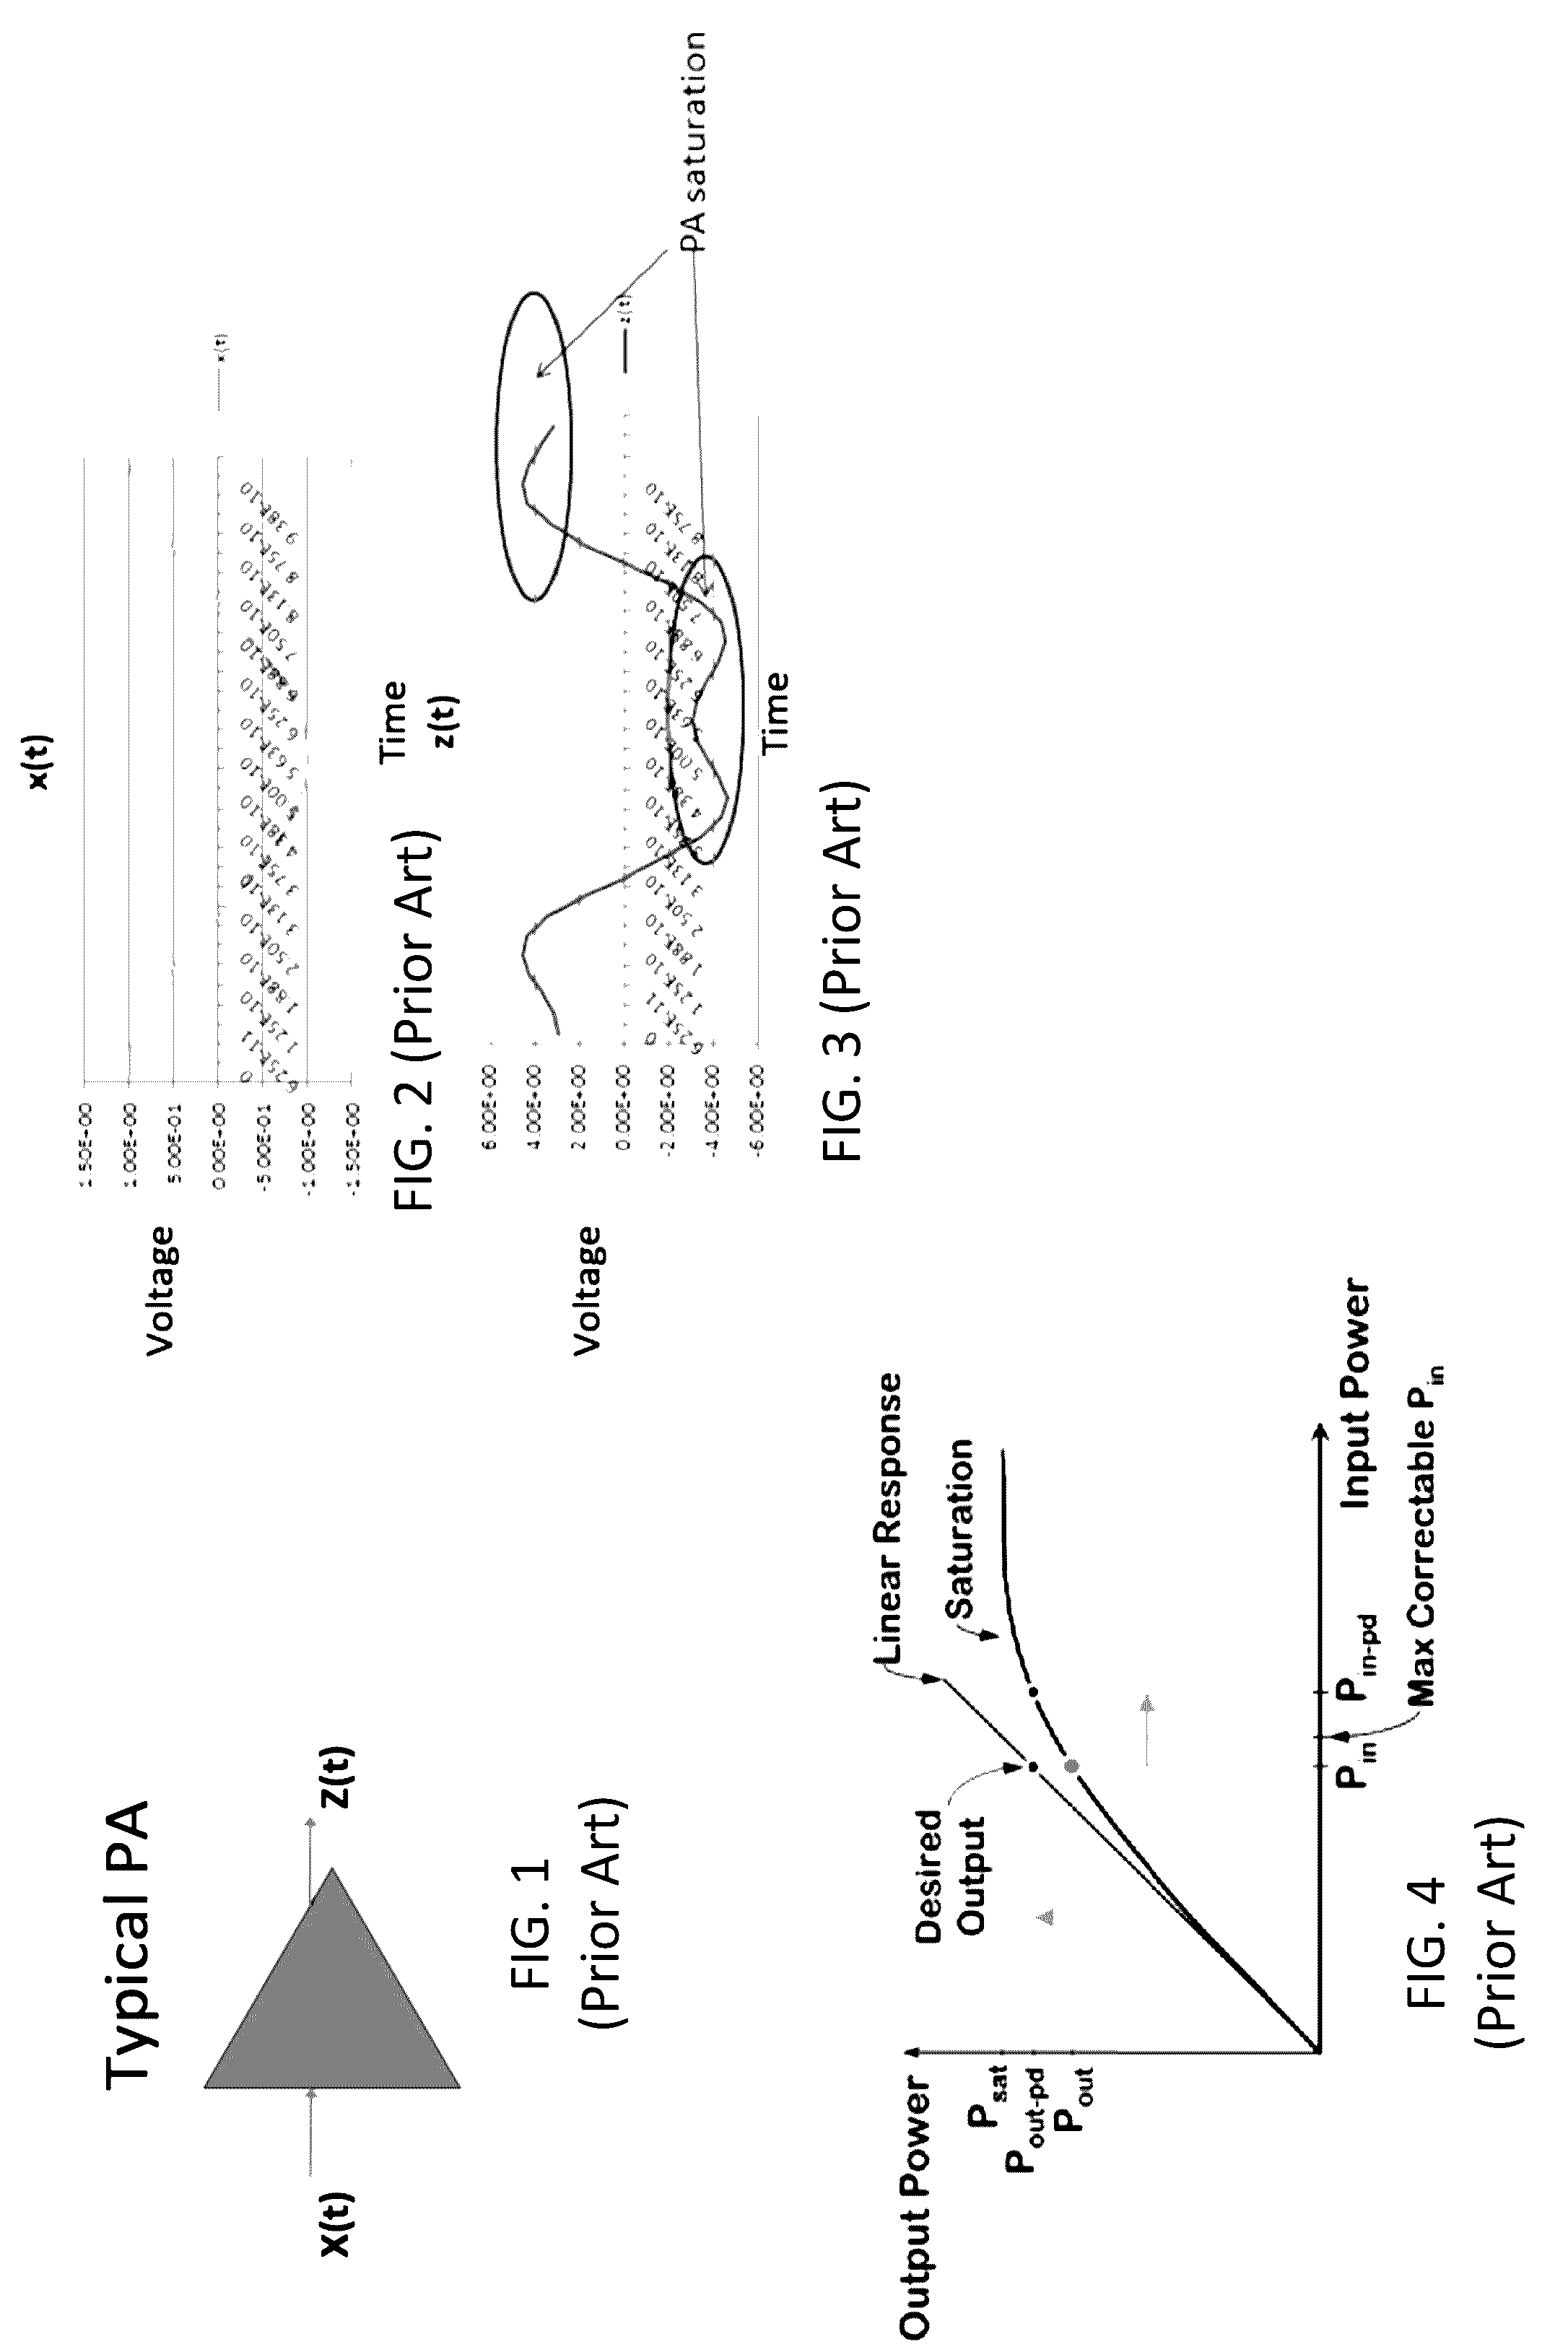 MRAM-Based Pre-Distortion Linearization and Amplification Circuits